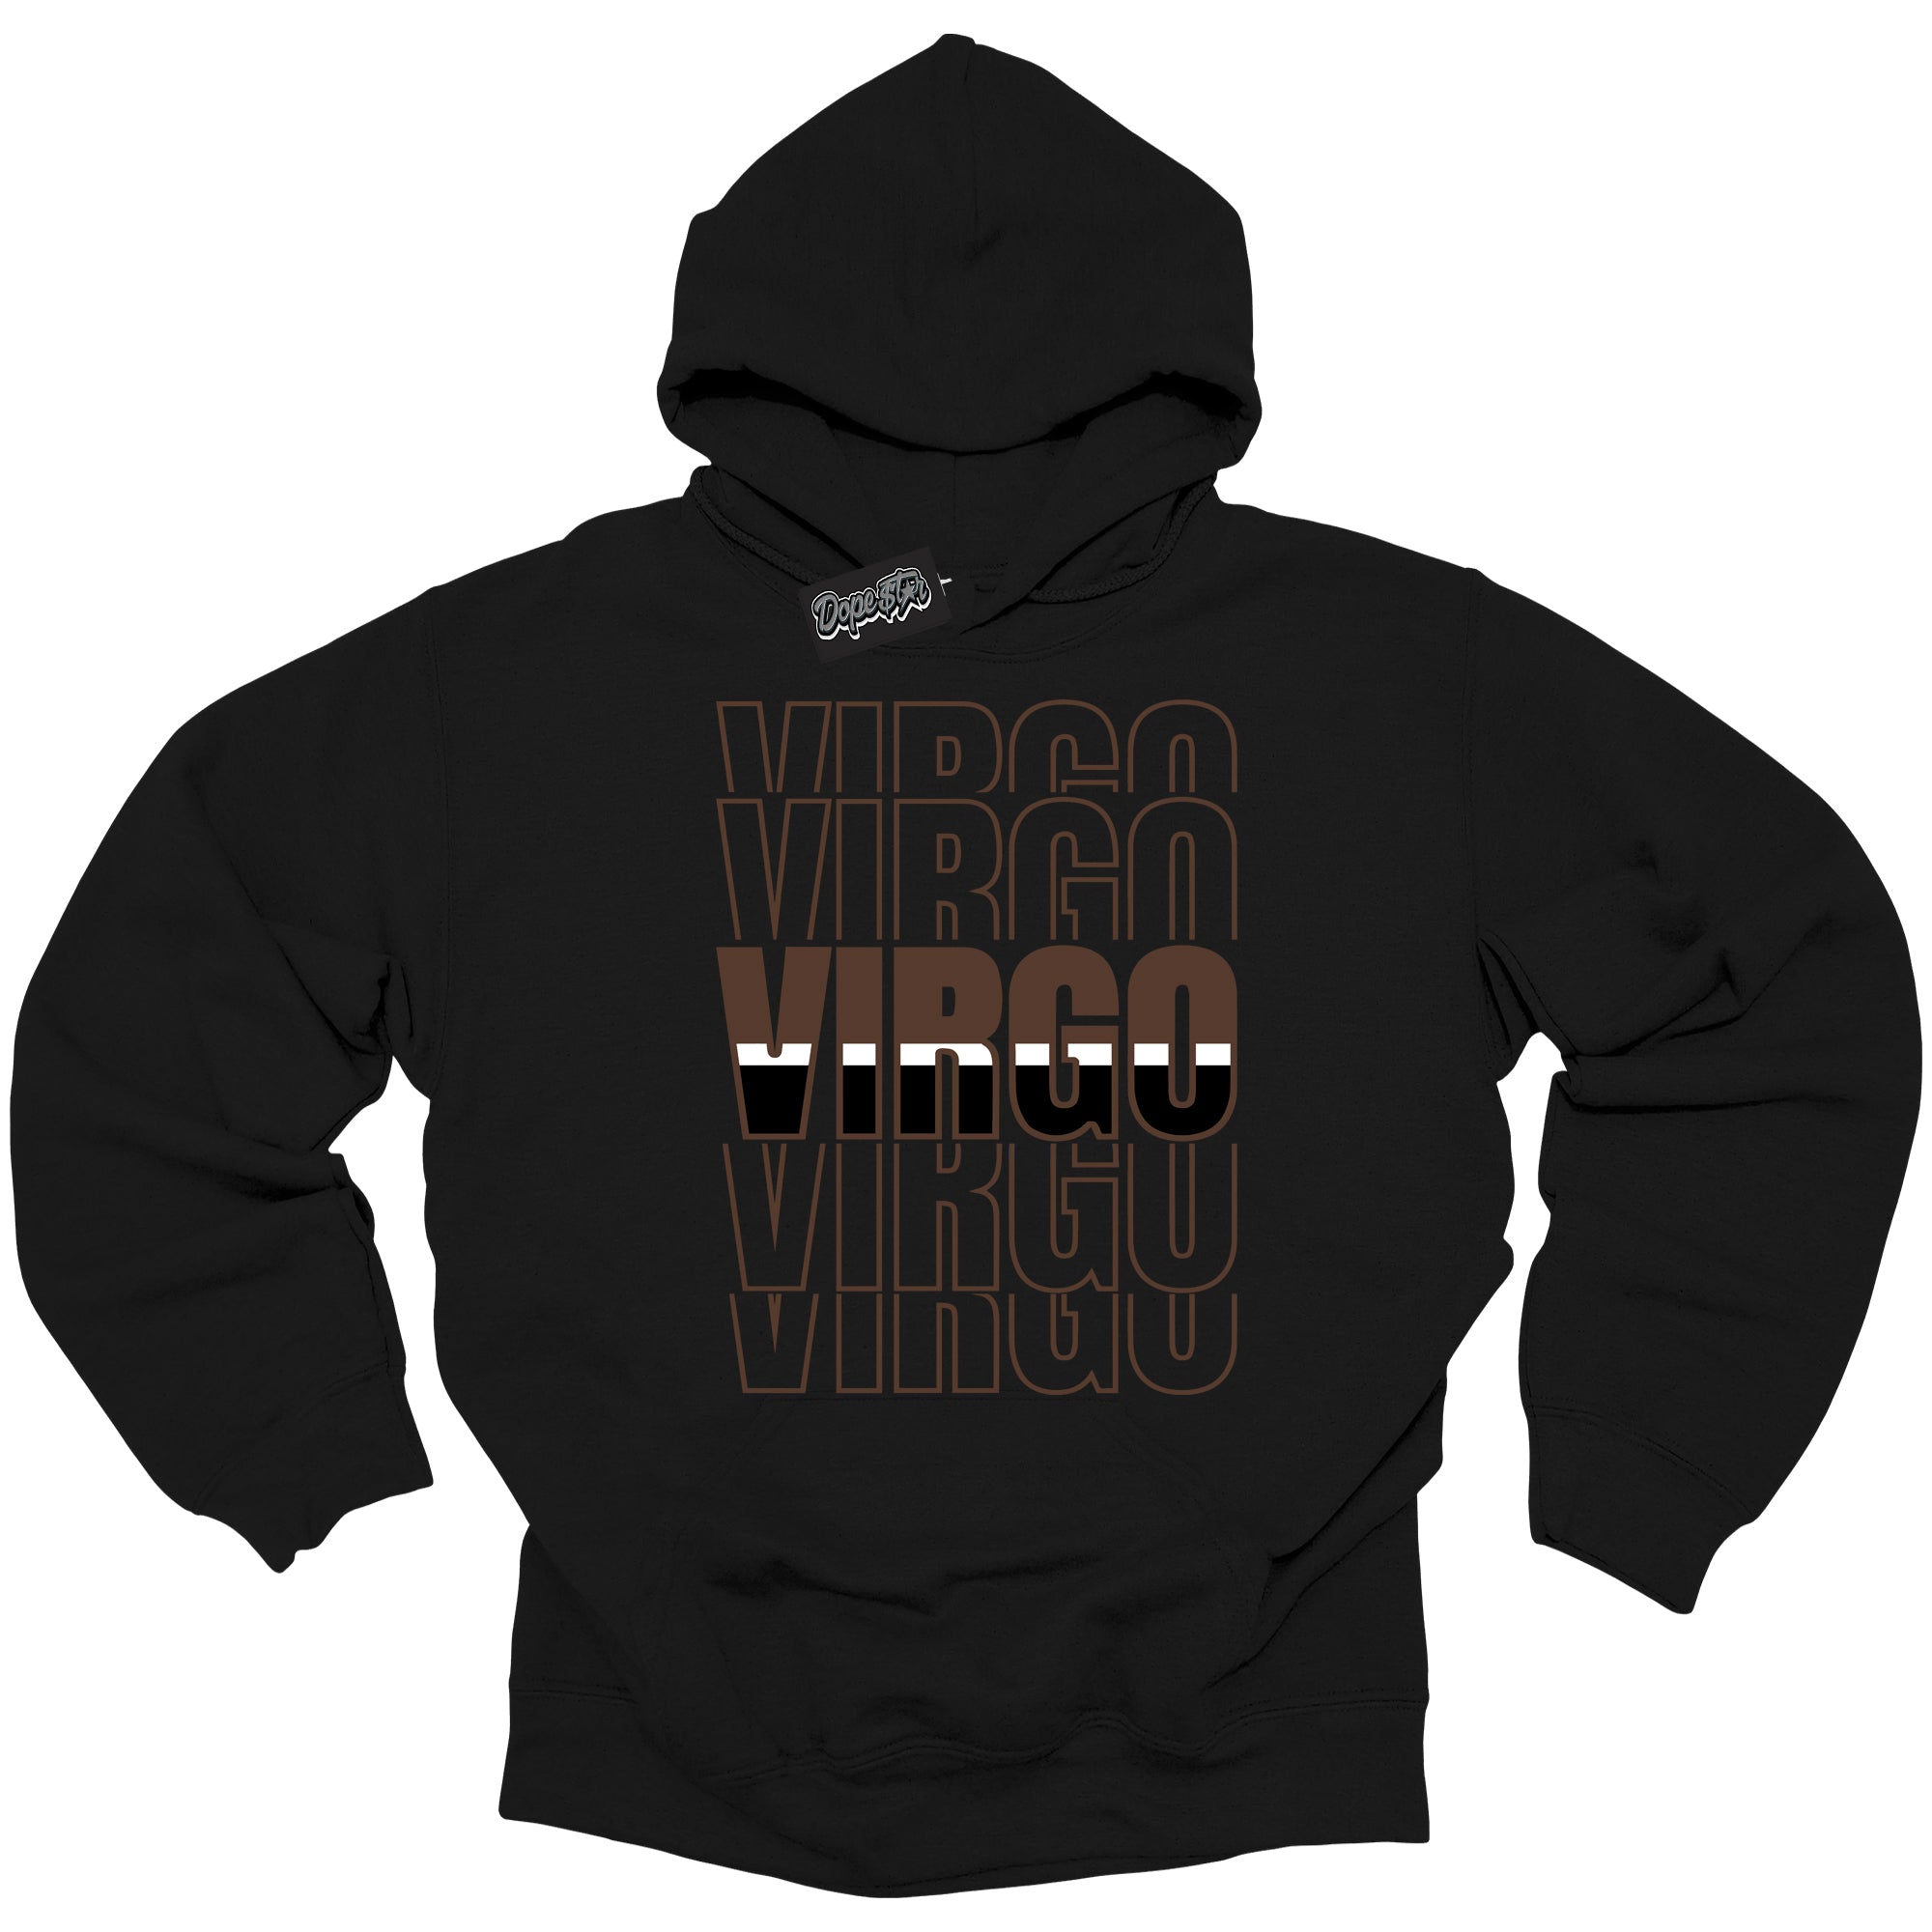 Cool Black Graphic DopeStar Hoodie with “ Virgo “ print, that perfectly matches Palomino 1s sneakers